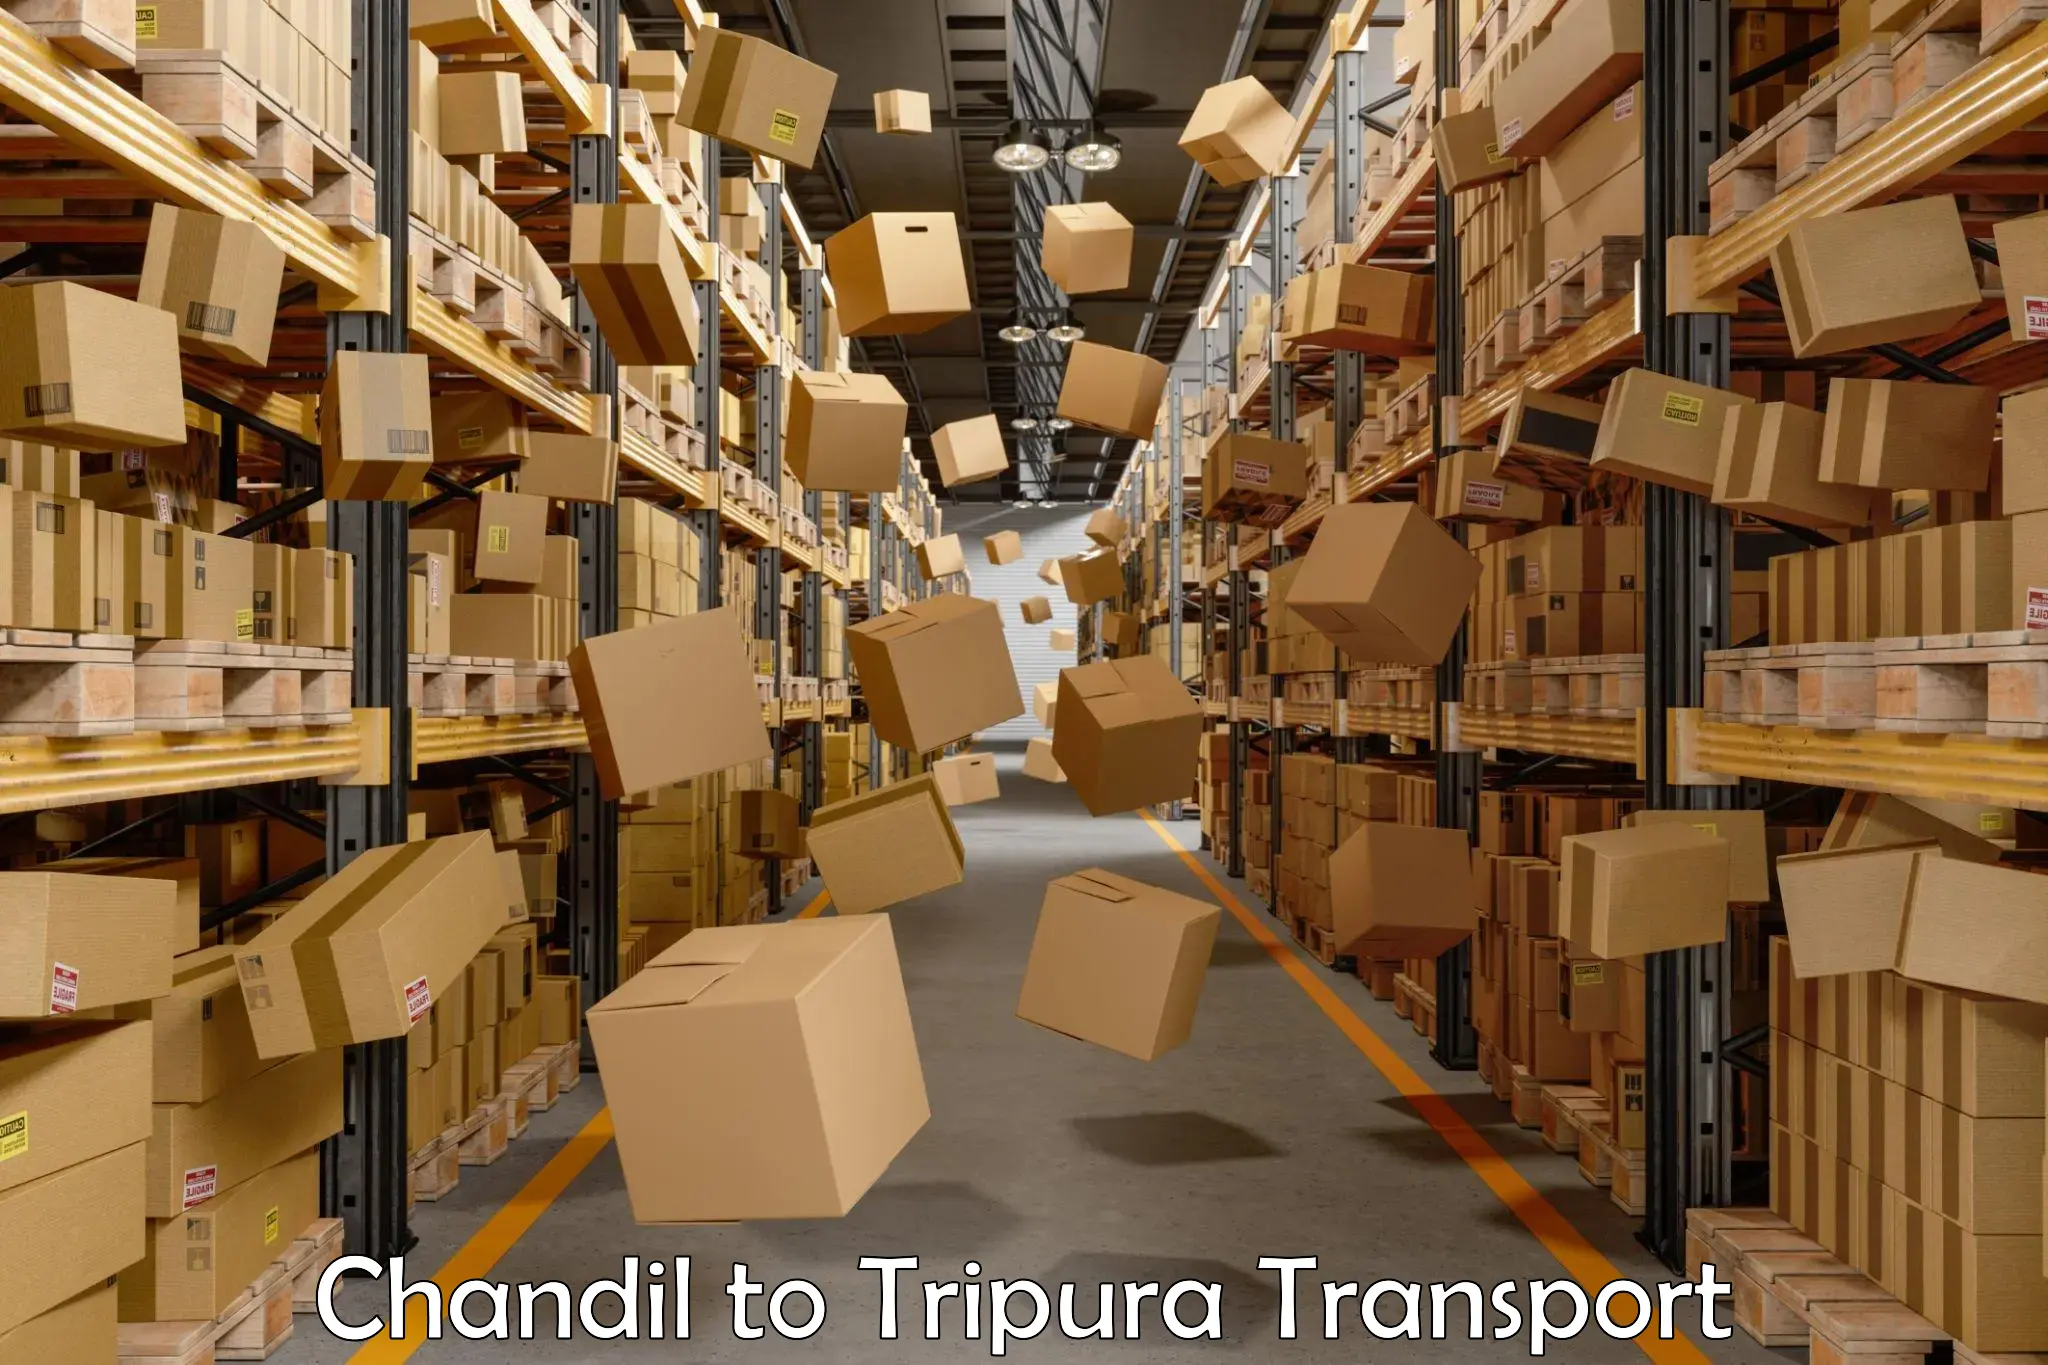 Domestic goods transportation services Chandil to Udaipur Tripura